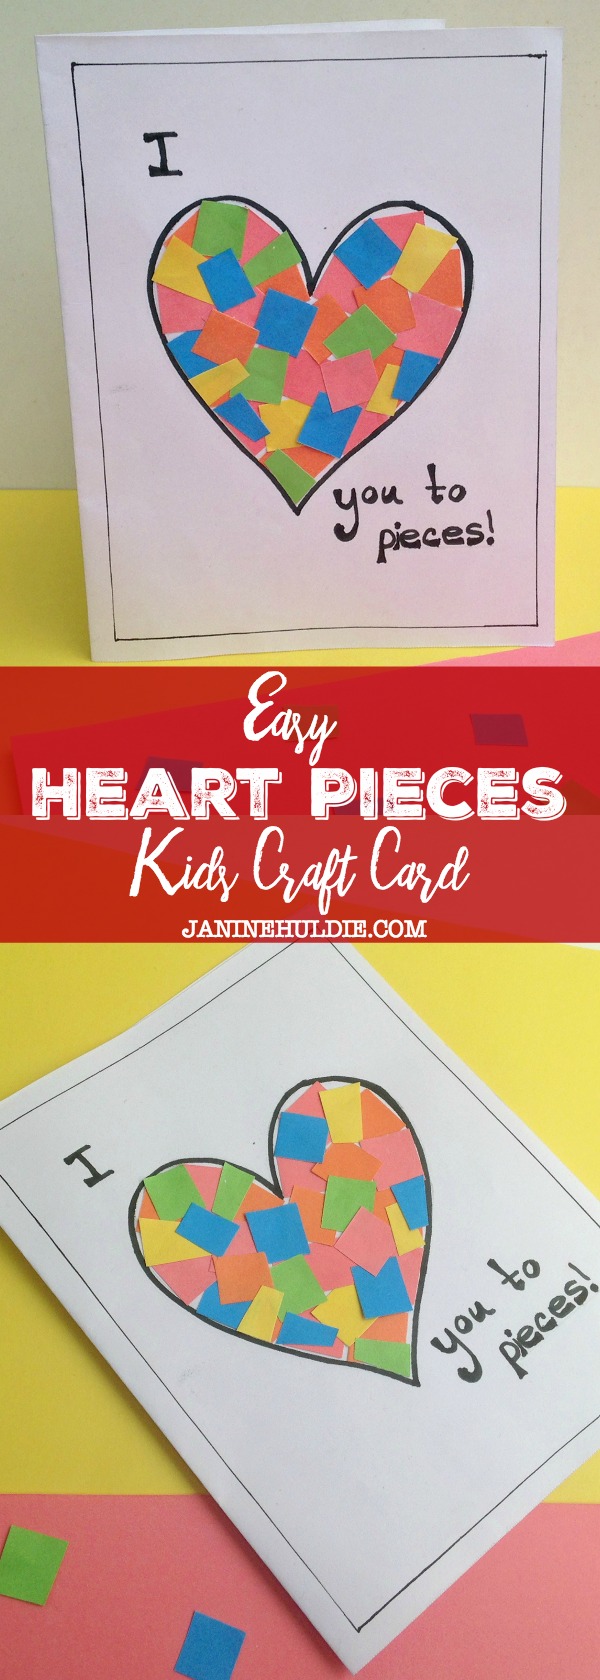 Easy Heart Pieces Kids Craft Card